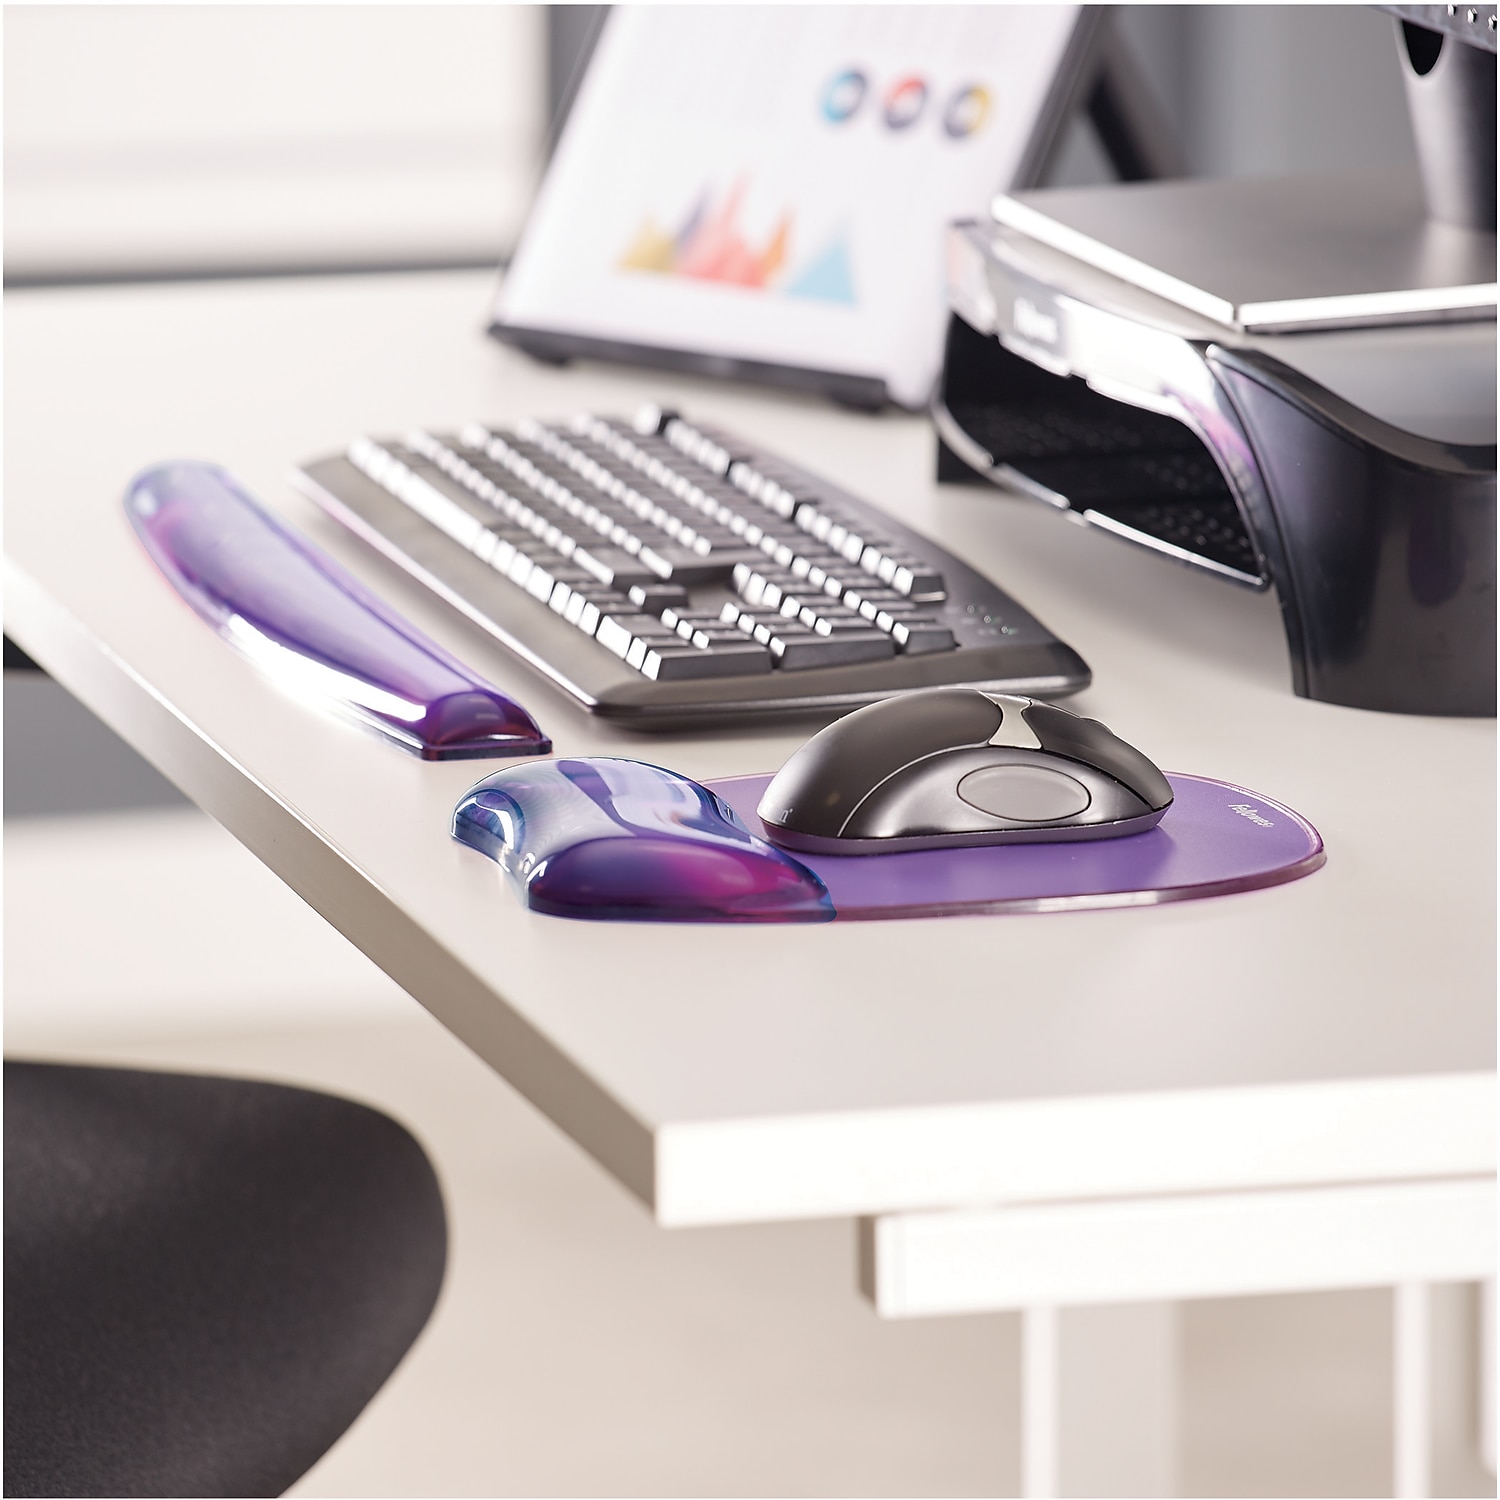 Fellowes 91441 Gel Crystals Mousepad/Wrist Rest - Purple - image 3 of 4